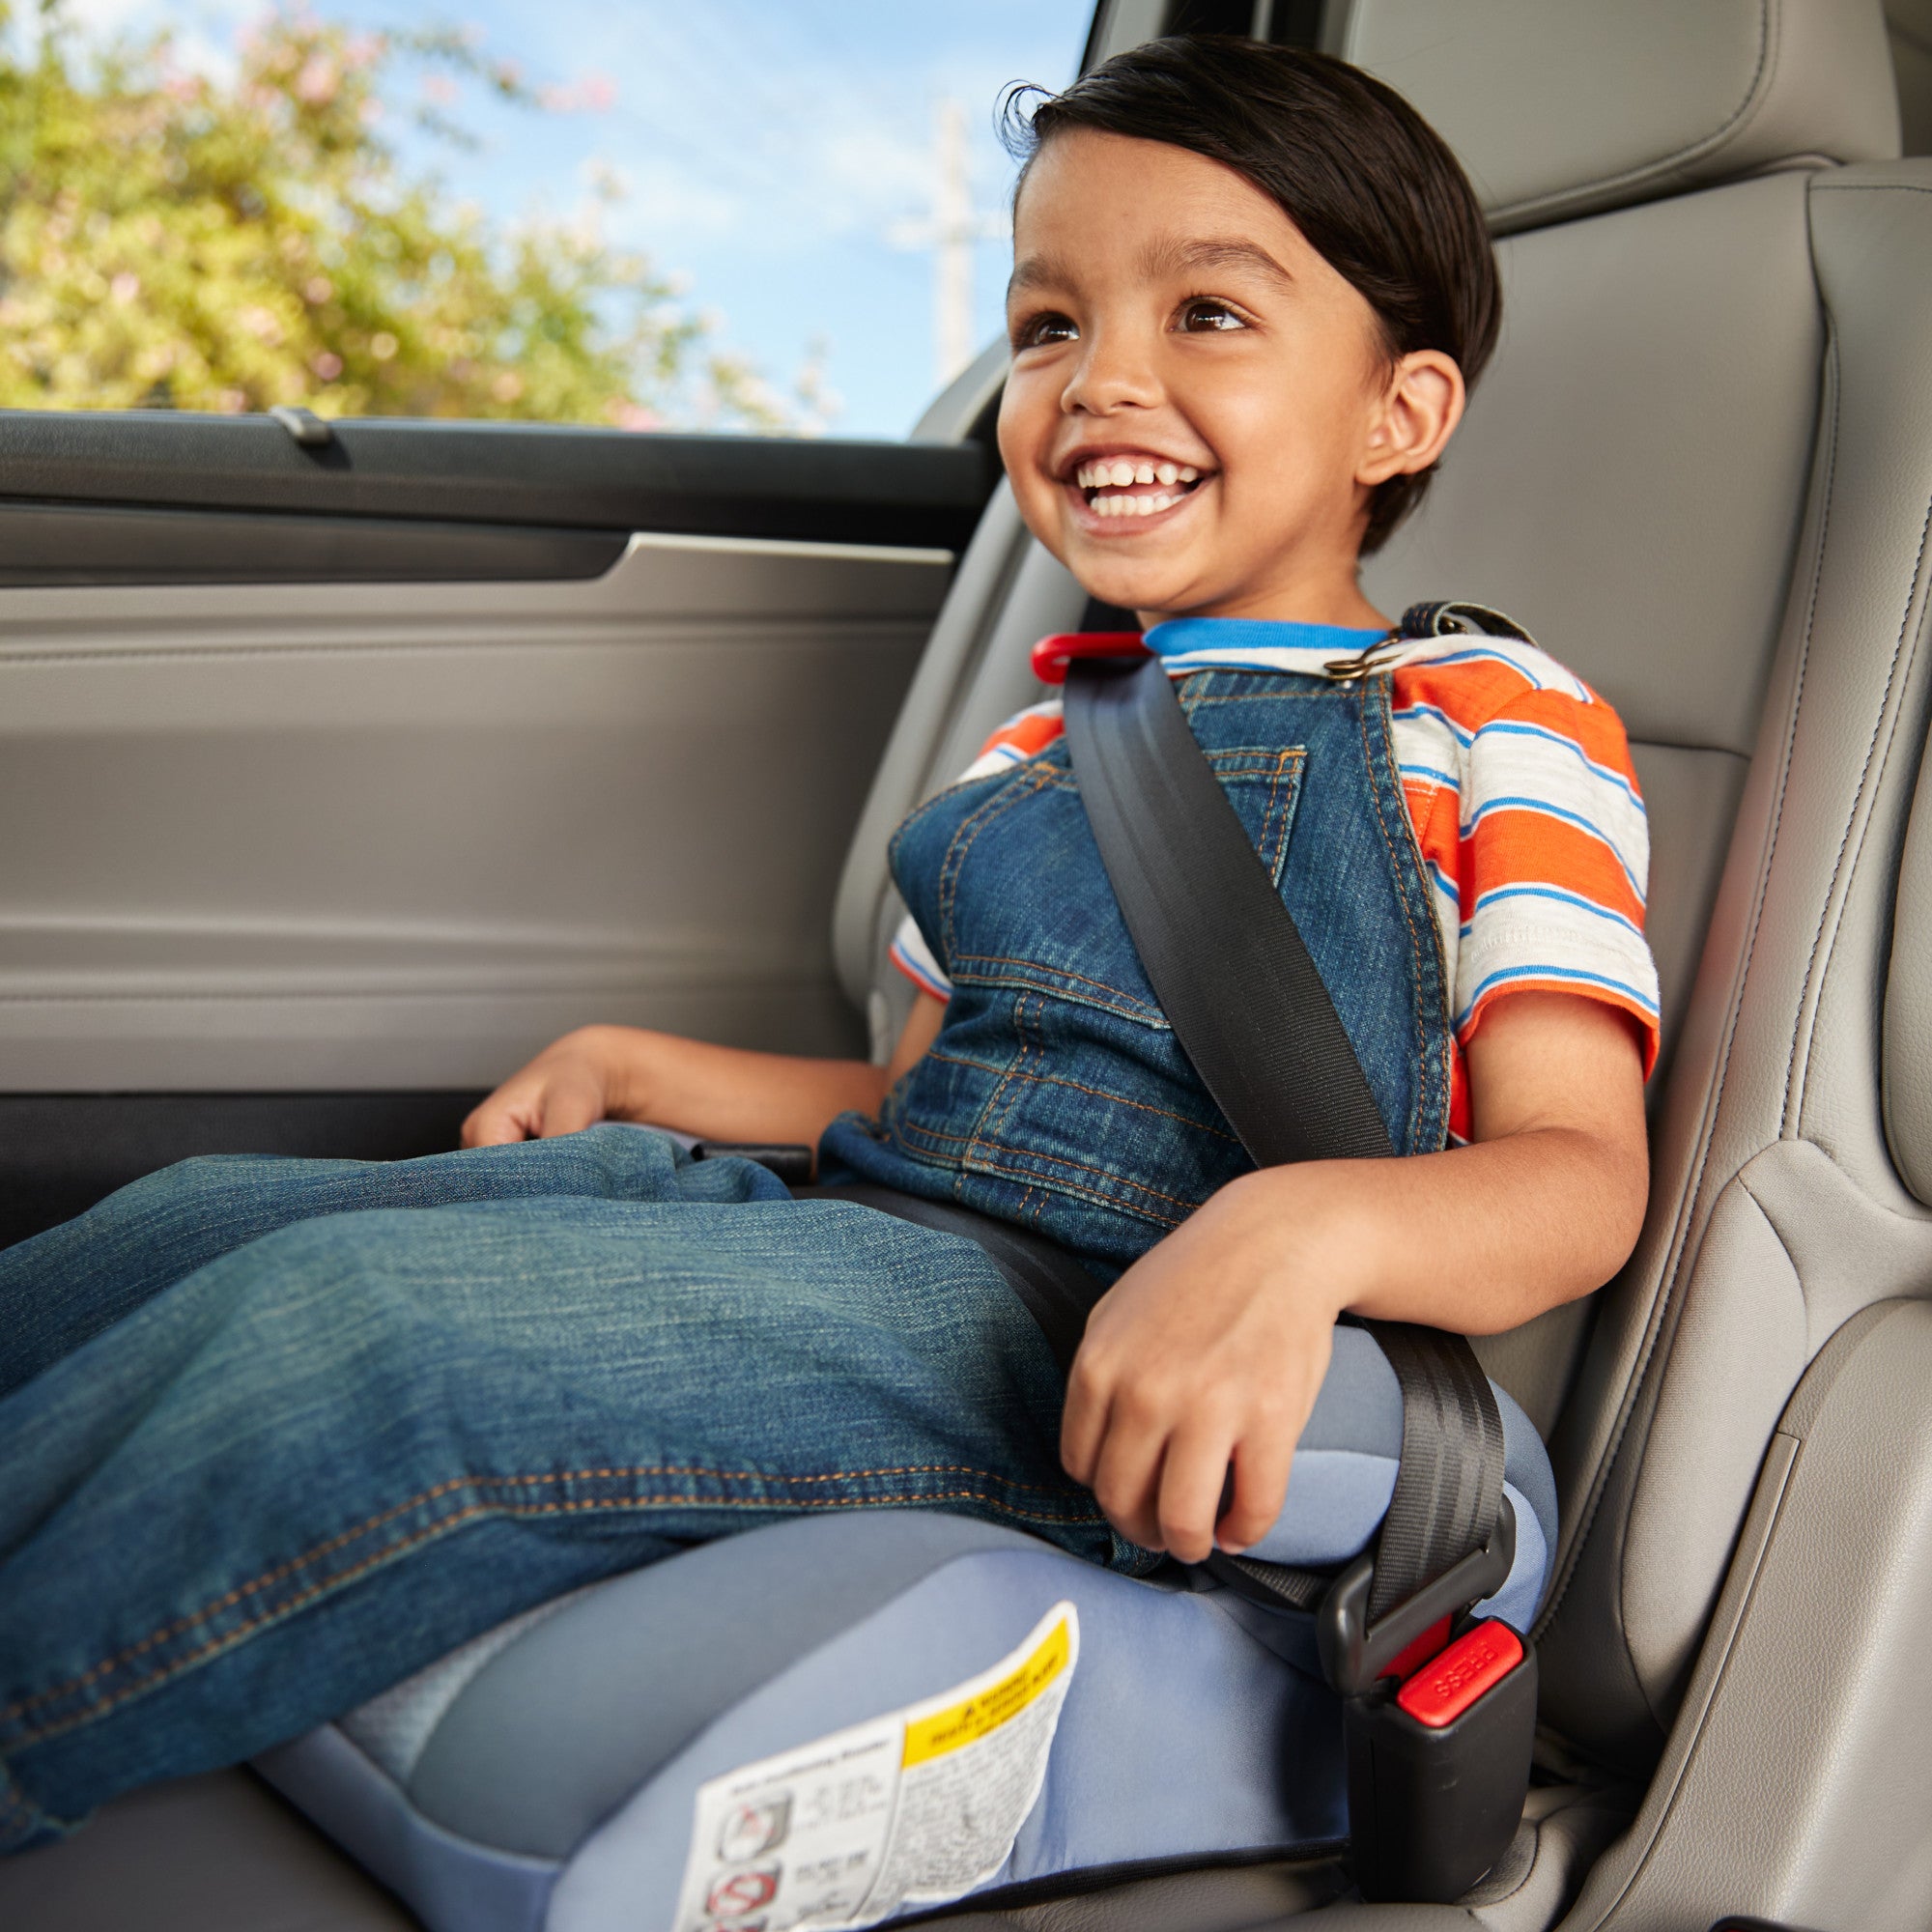 Cosco Kids™ Topside Booster Car Seat - Organic Waves - seat-friendly design leaves vehicle seats unmarked